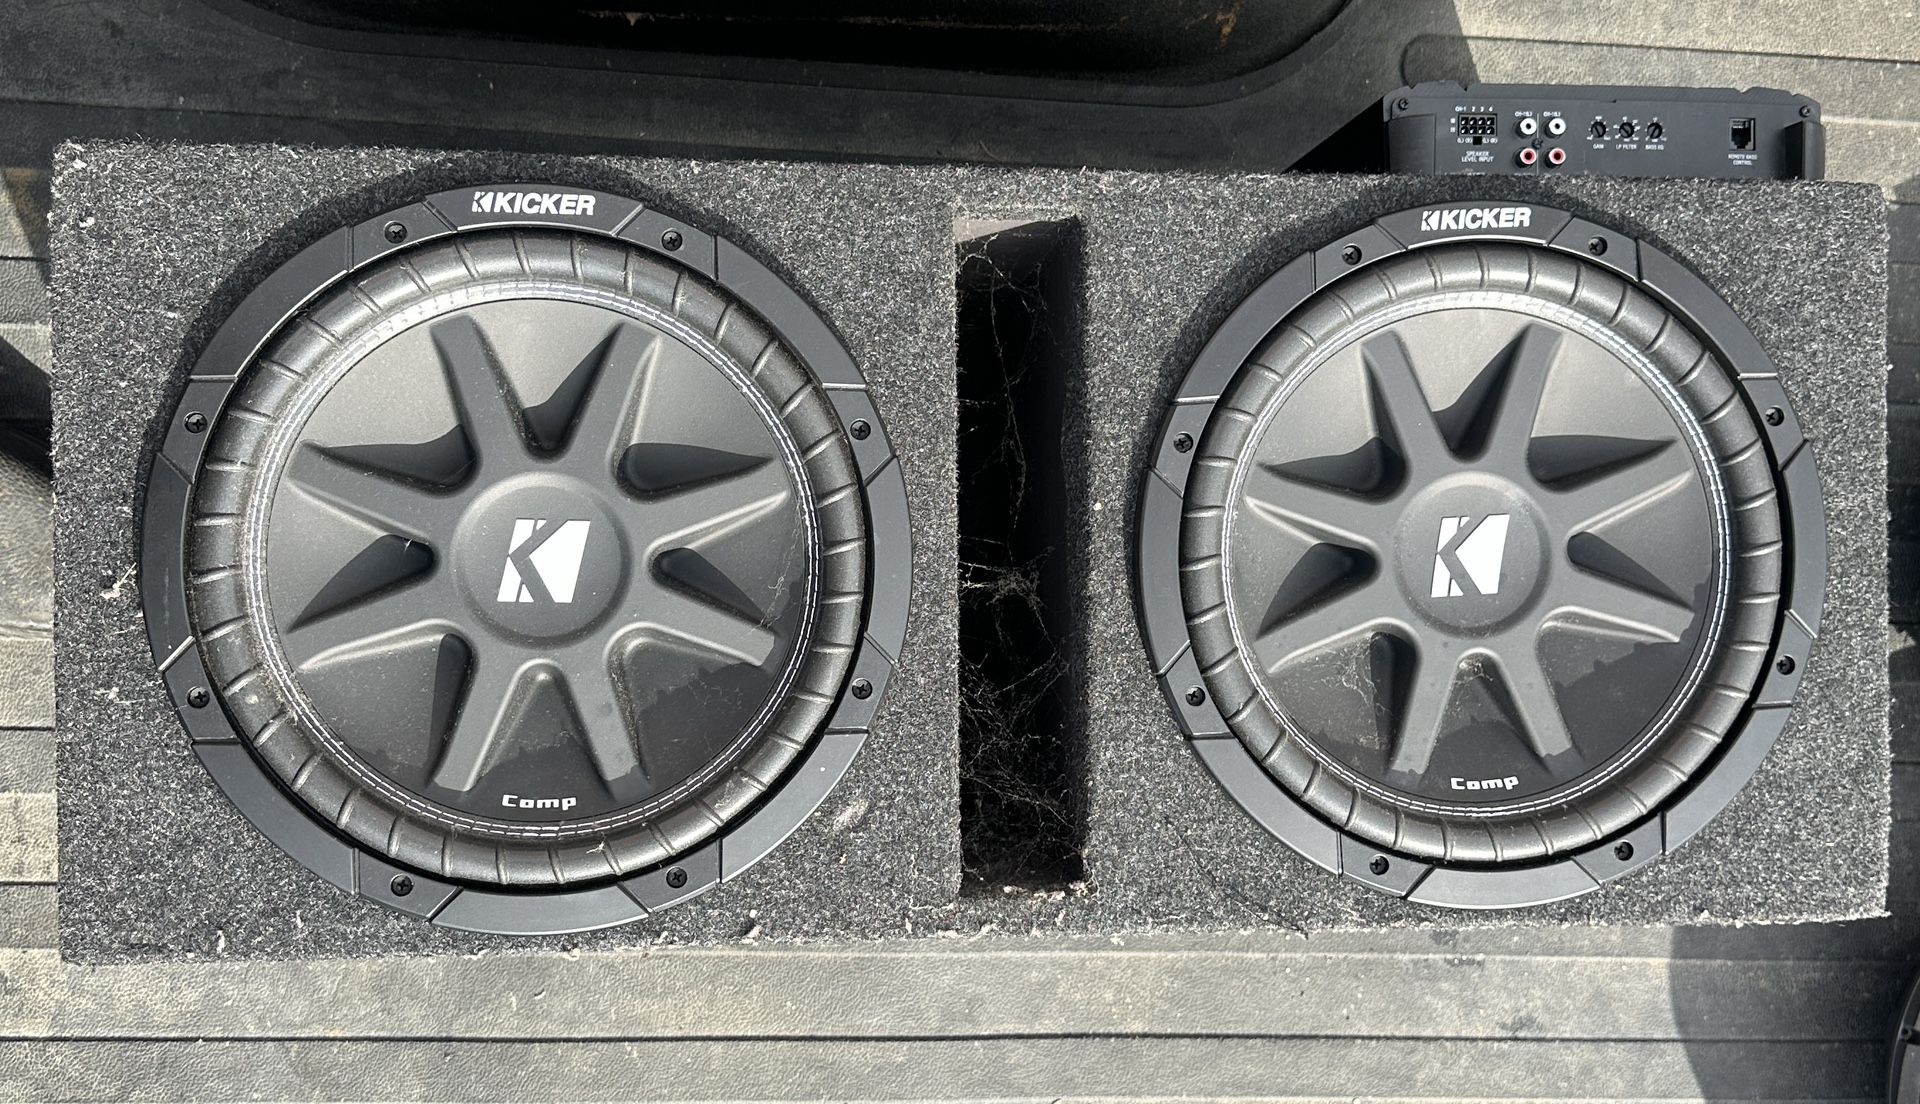 2 12” Kicker Subs And Amp for Sale!